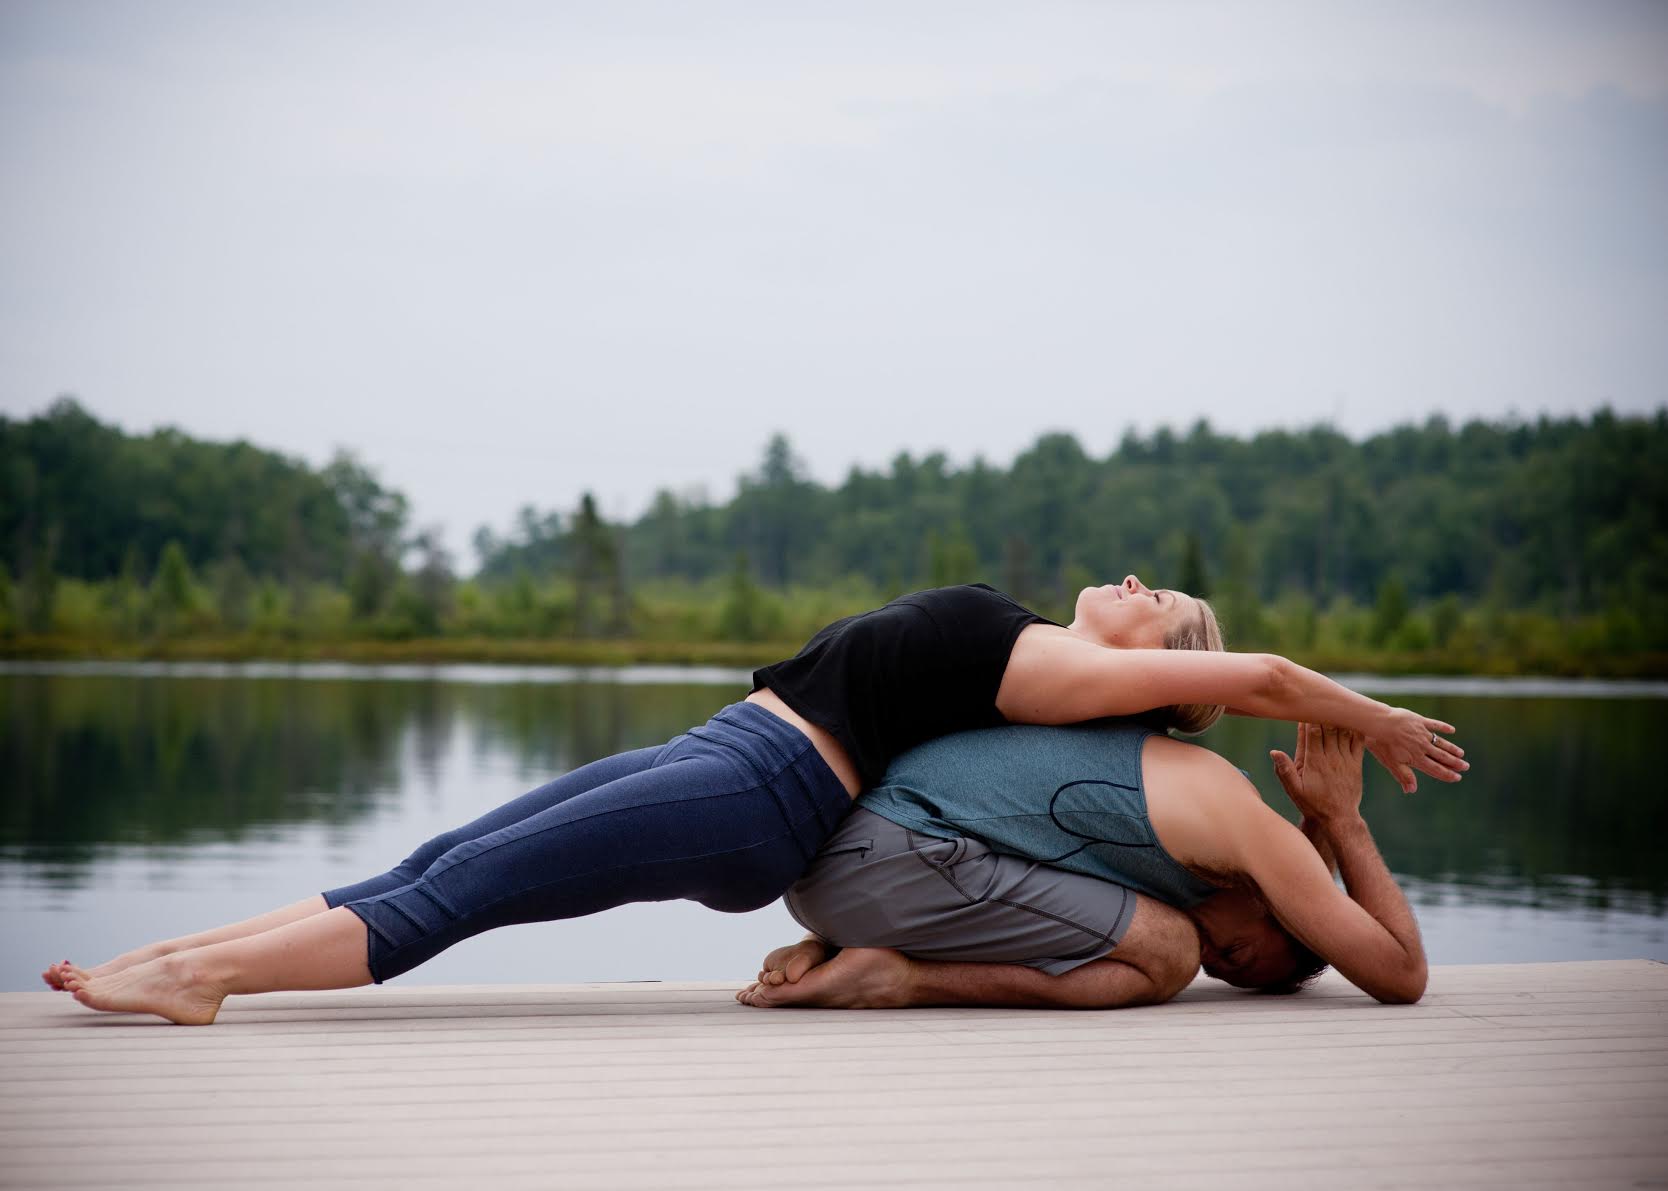 Couple Yoga: Benefits & Poses to Try With Your Partner